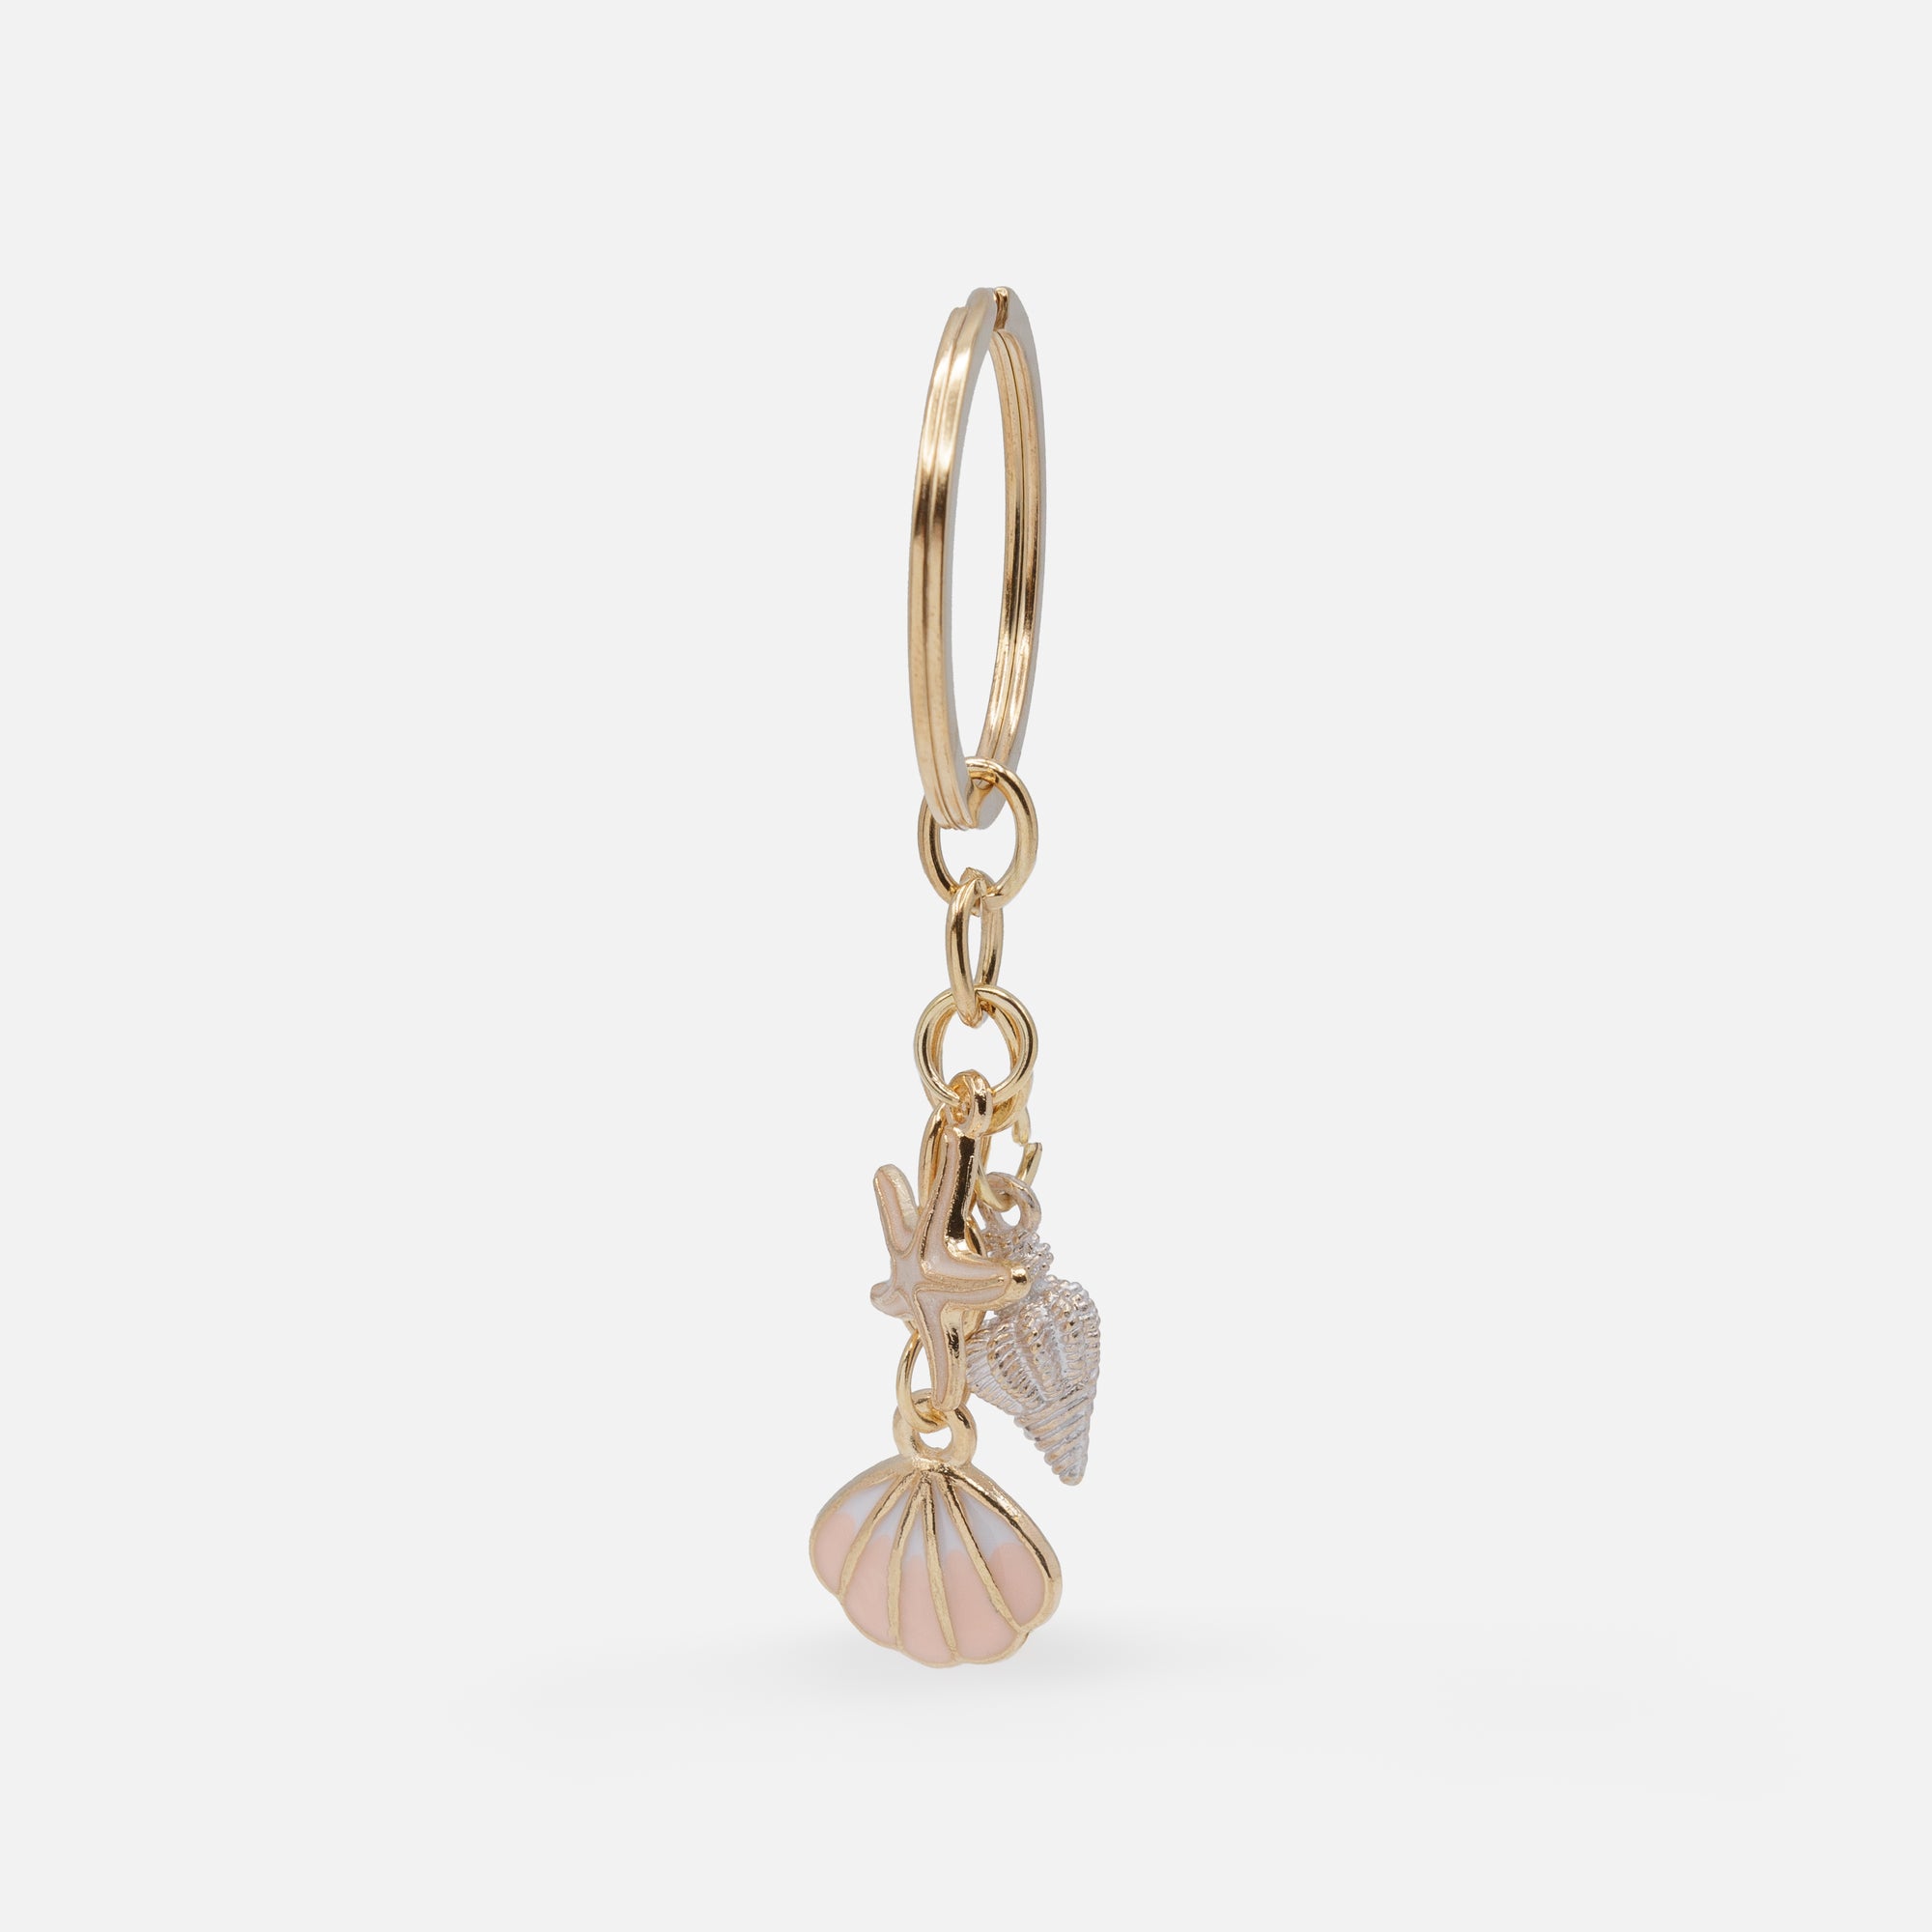 Gold keyring with seaside charms